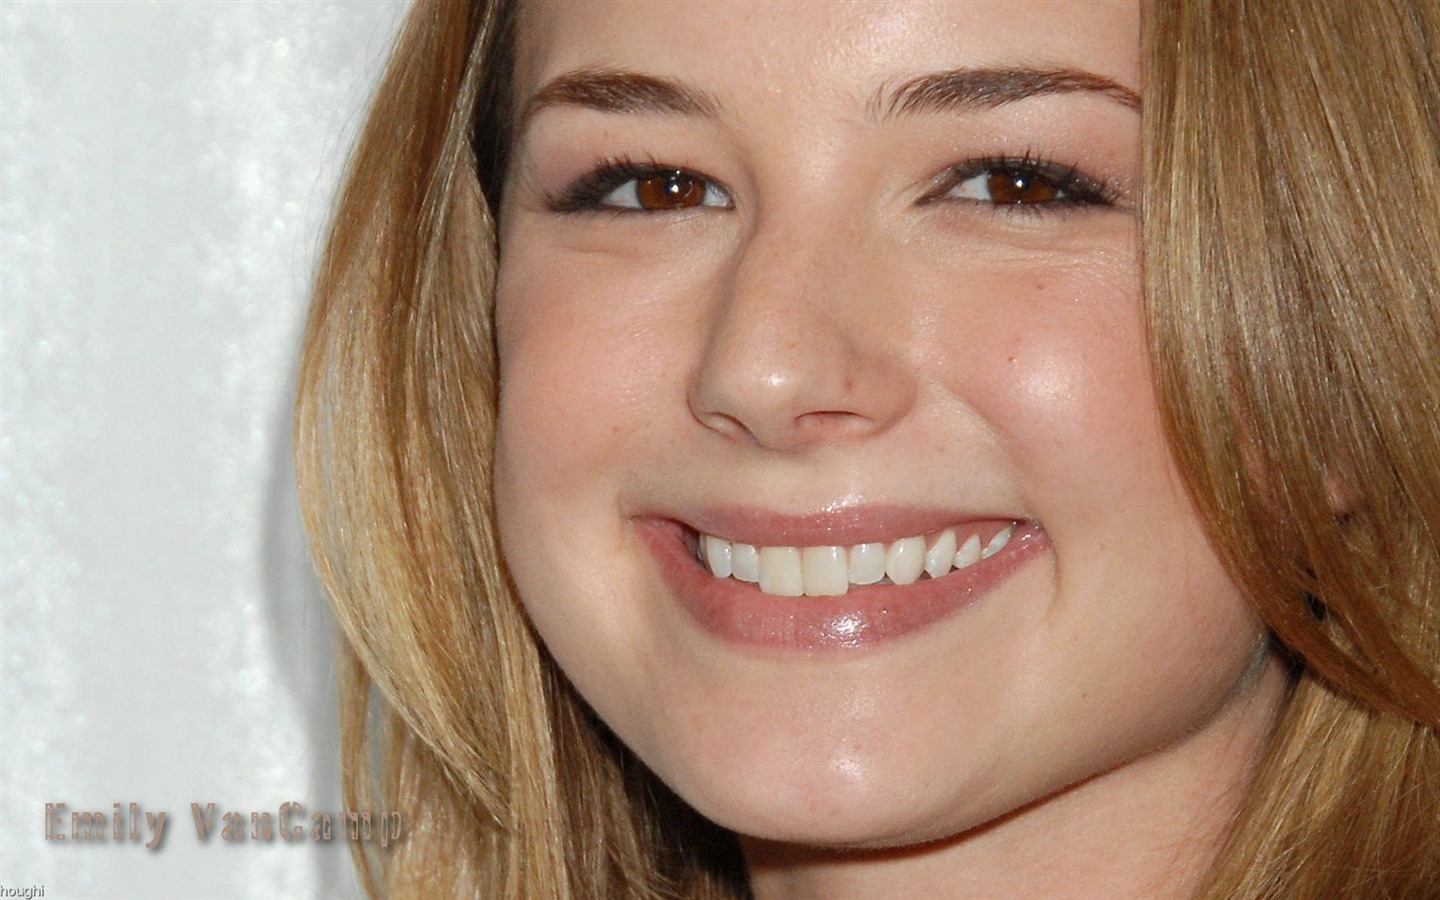 Emily VanCamp #009 - 1440x900 Wallpapers Pictures Photos Images